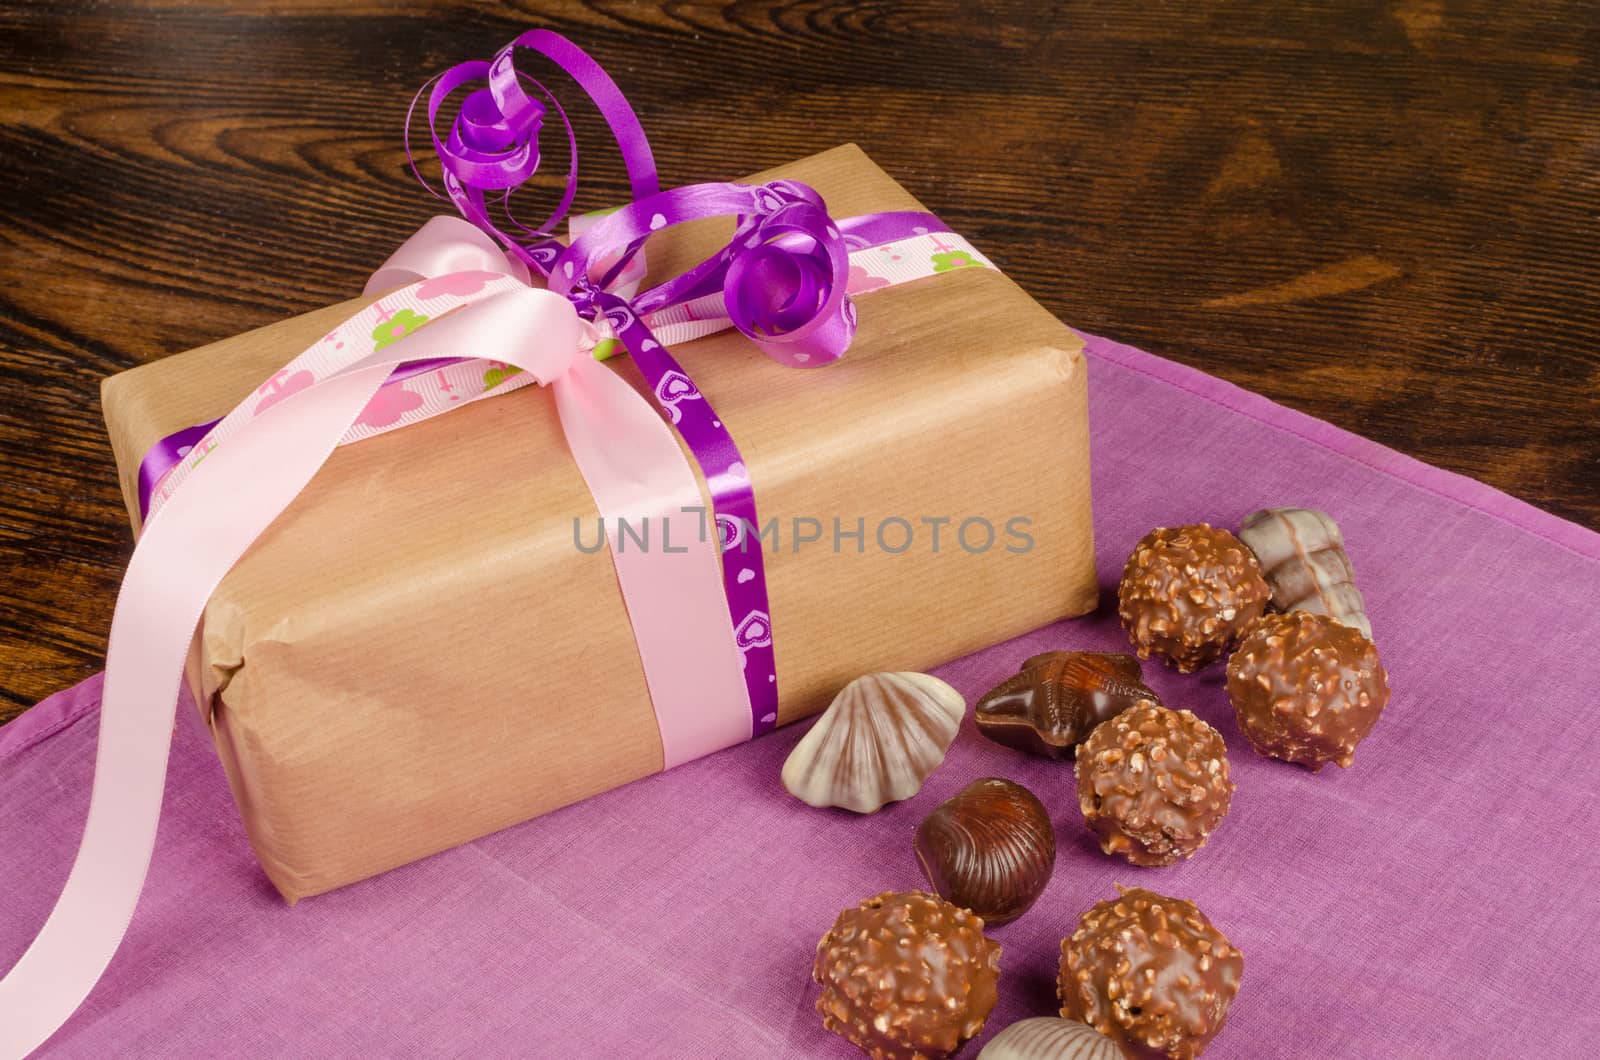 Valentines chocolate treats next to a gift box